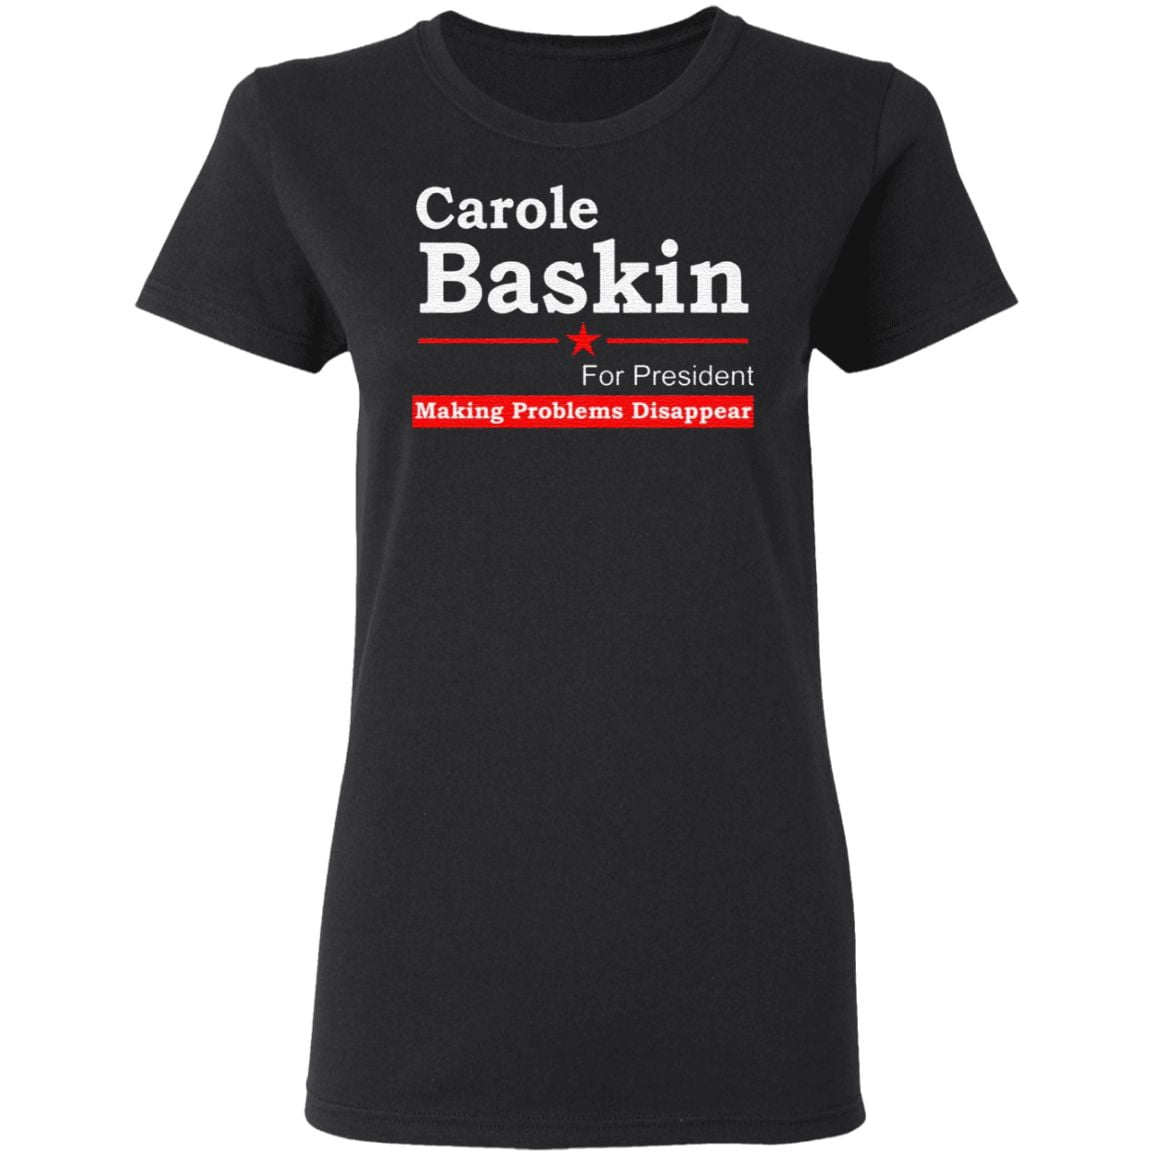 Carole Baskin For President Making Problems Disappear T Shirt